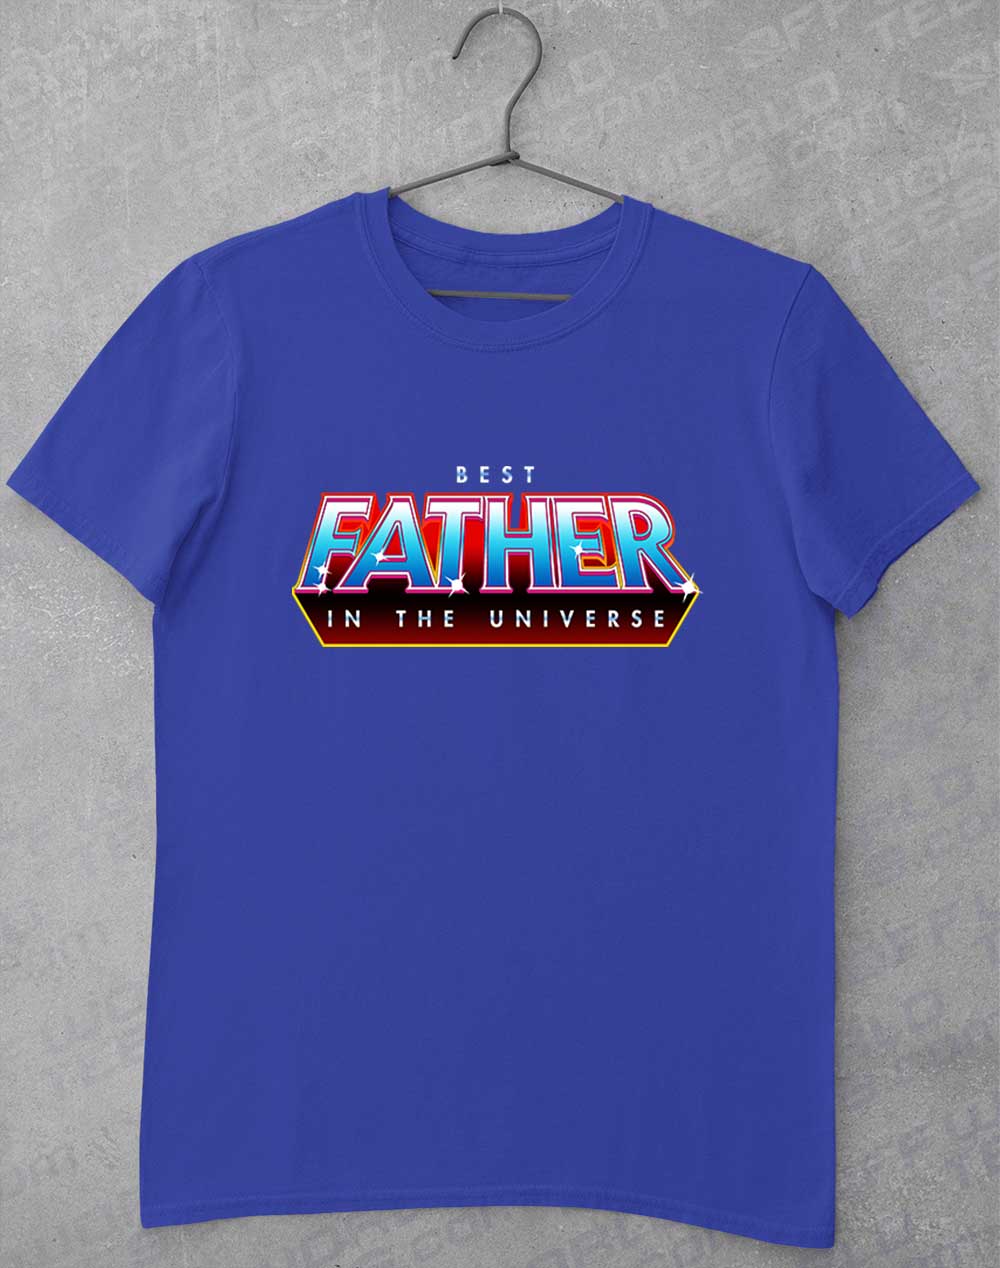 Royal - Best Father in the Universe T-Shirt